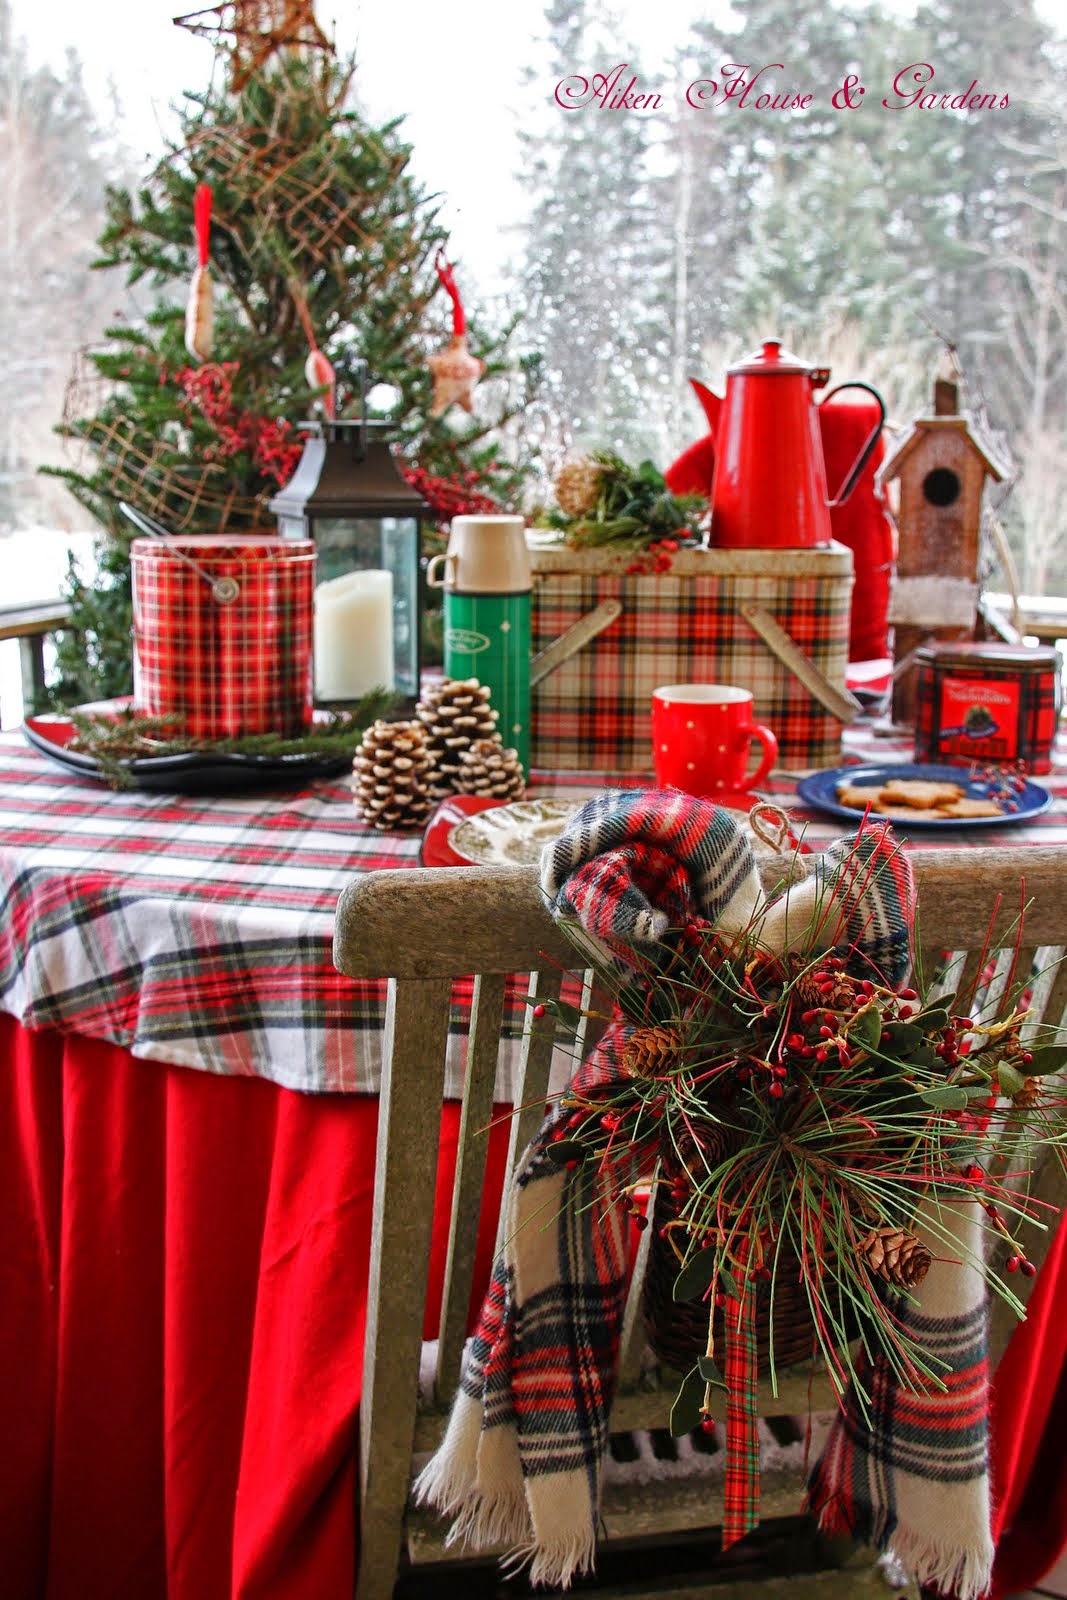 A table outside decorated in plaid and sprigs of evergreen.